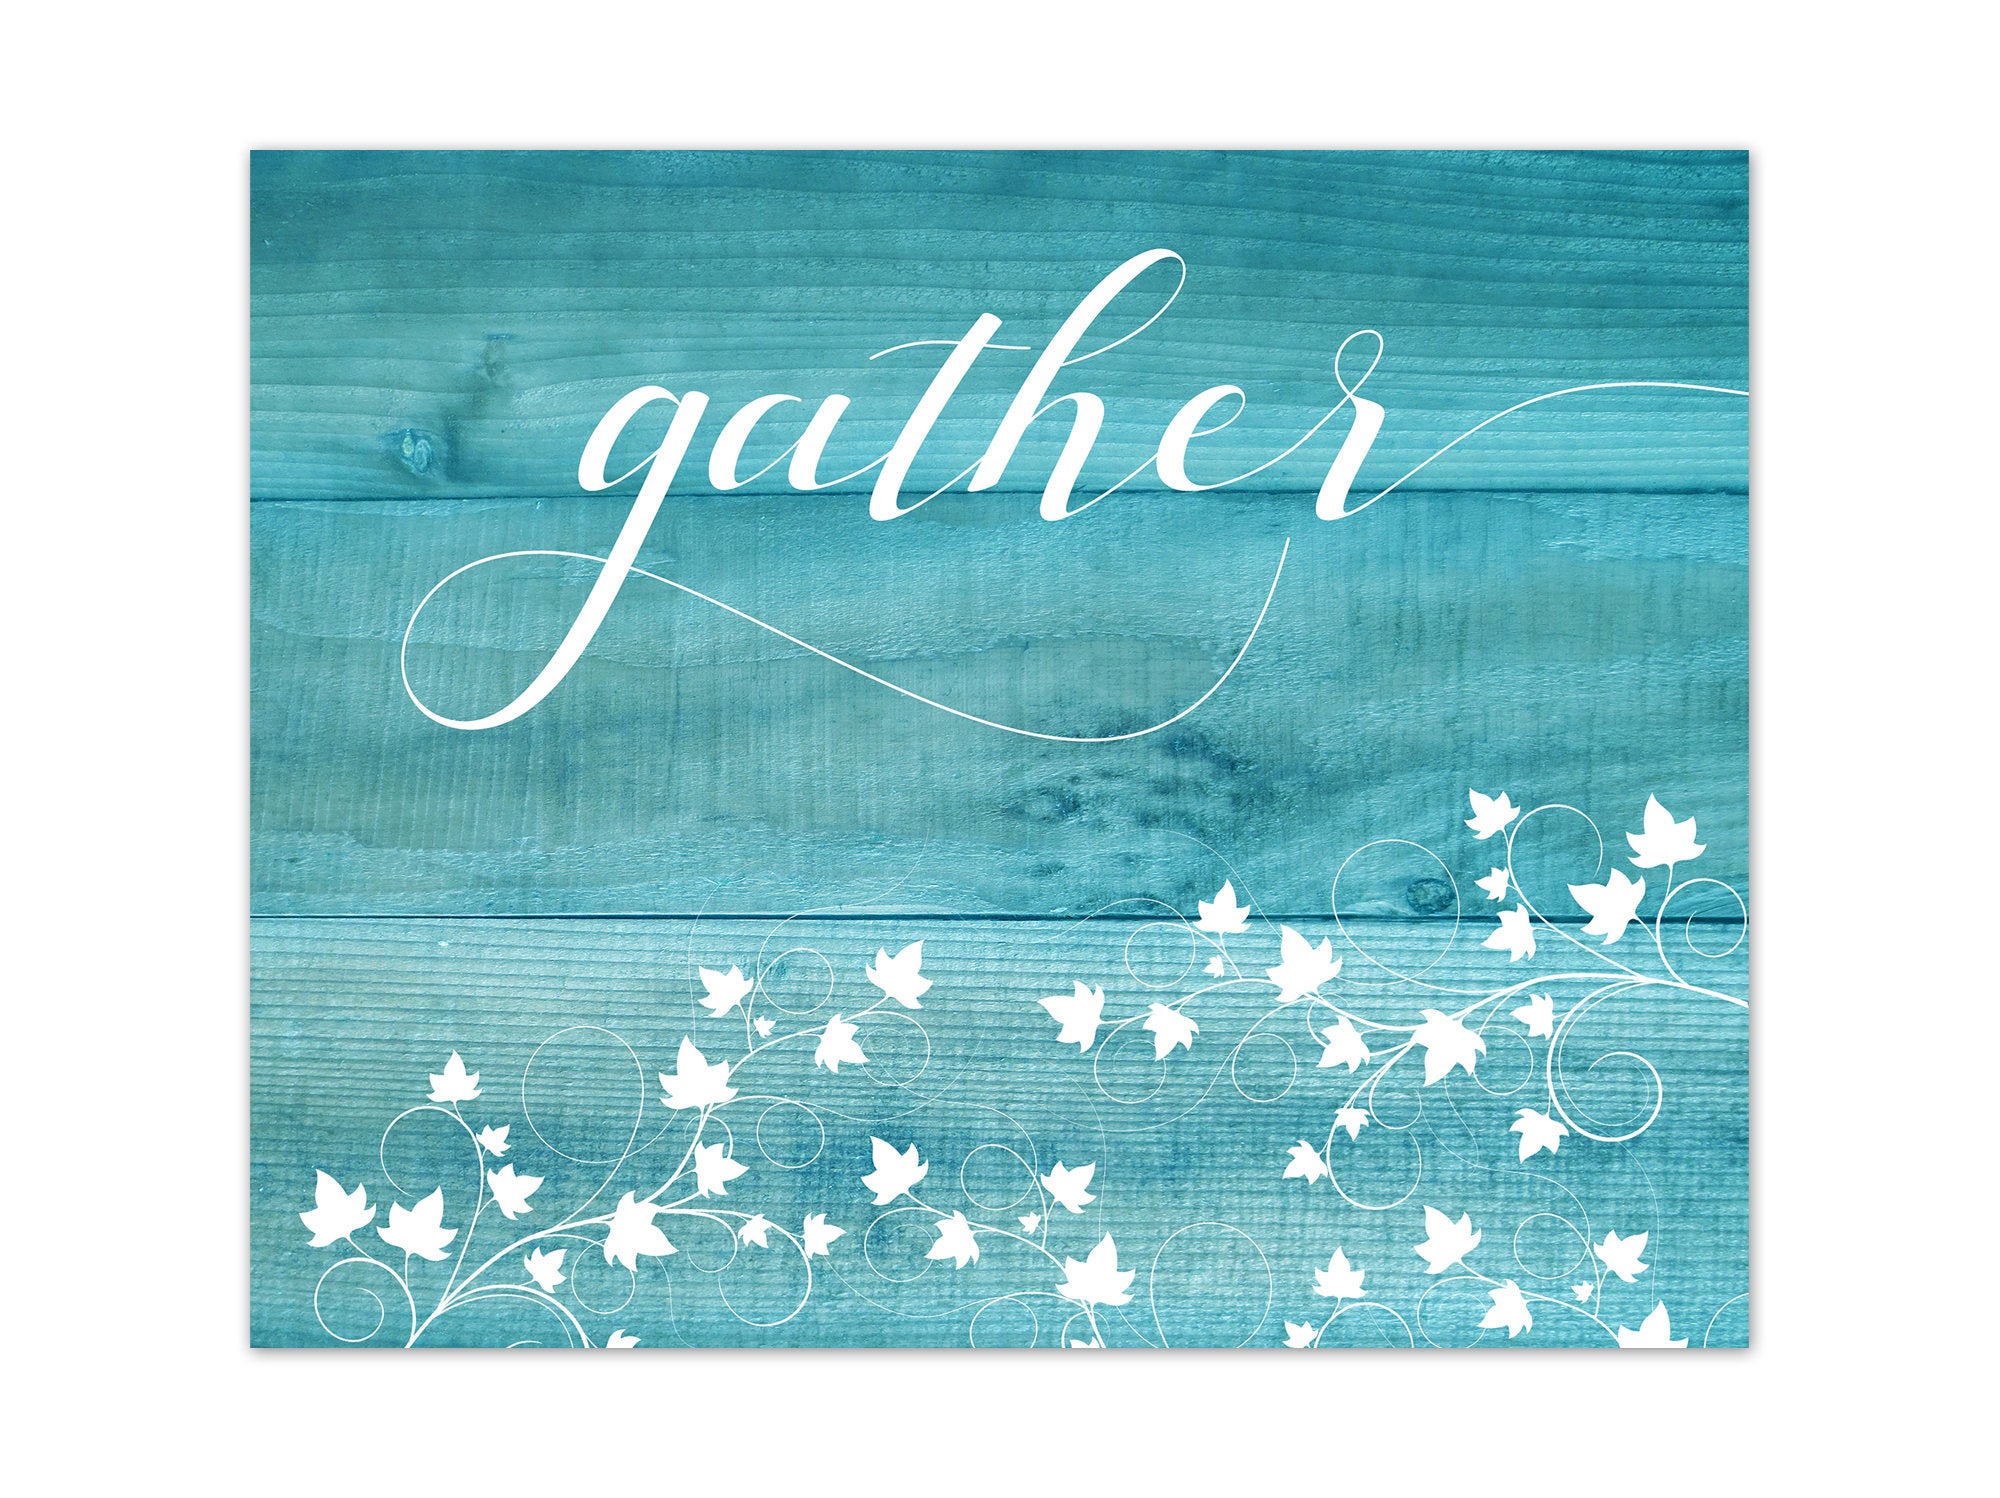 Aqua Farmhouse Wall Art for Kitchen, Dining Room, Living Room - "Gather" Sign - HOME286